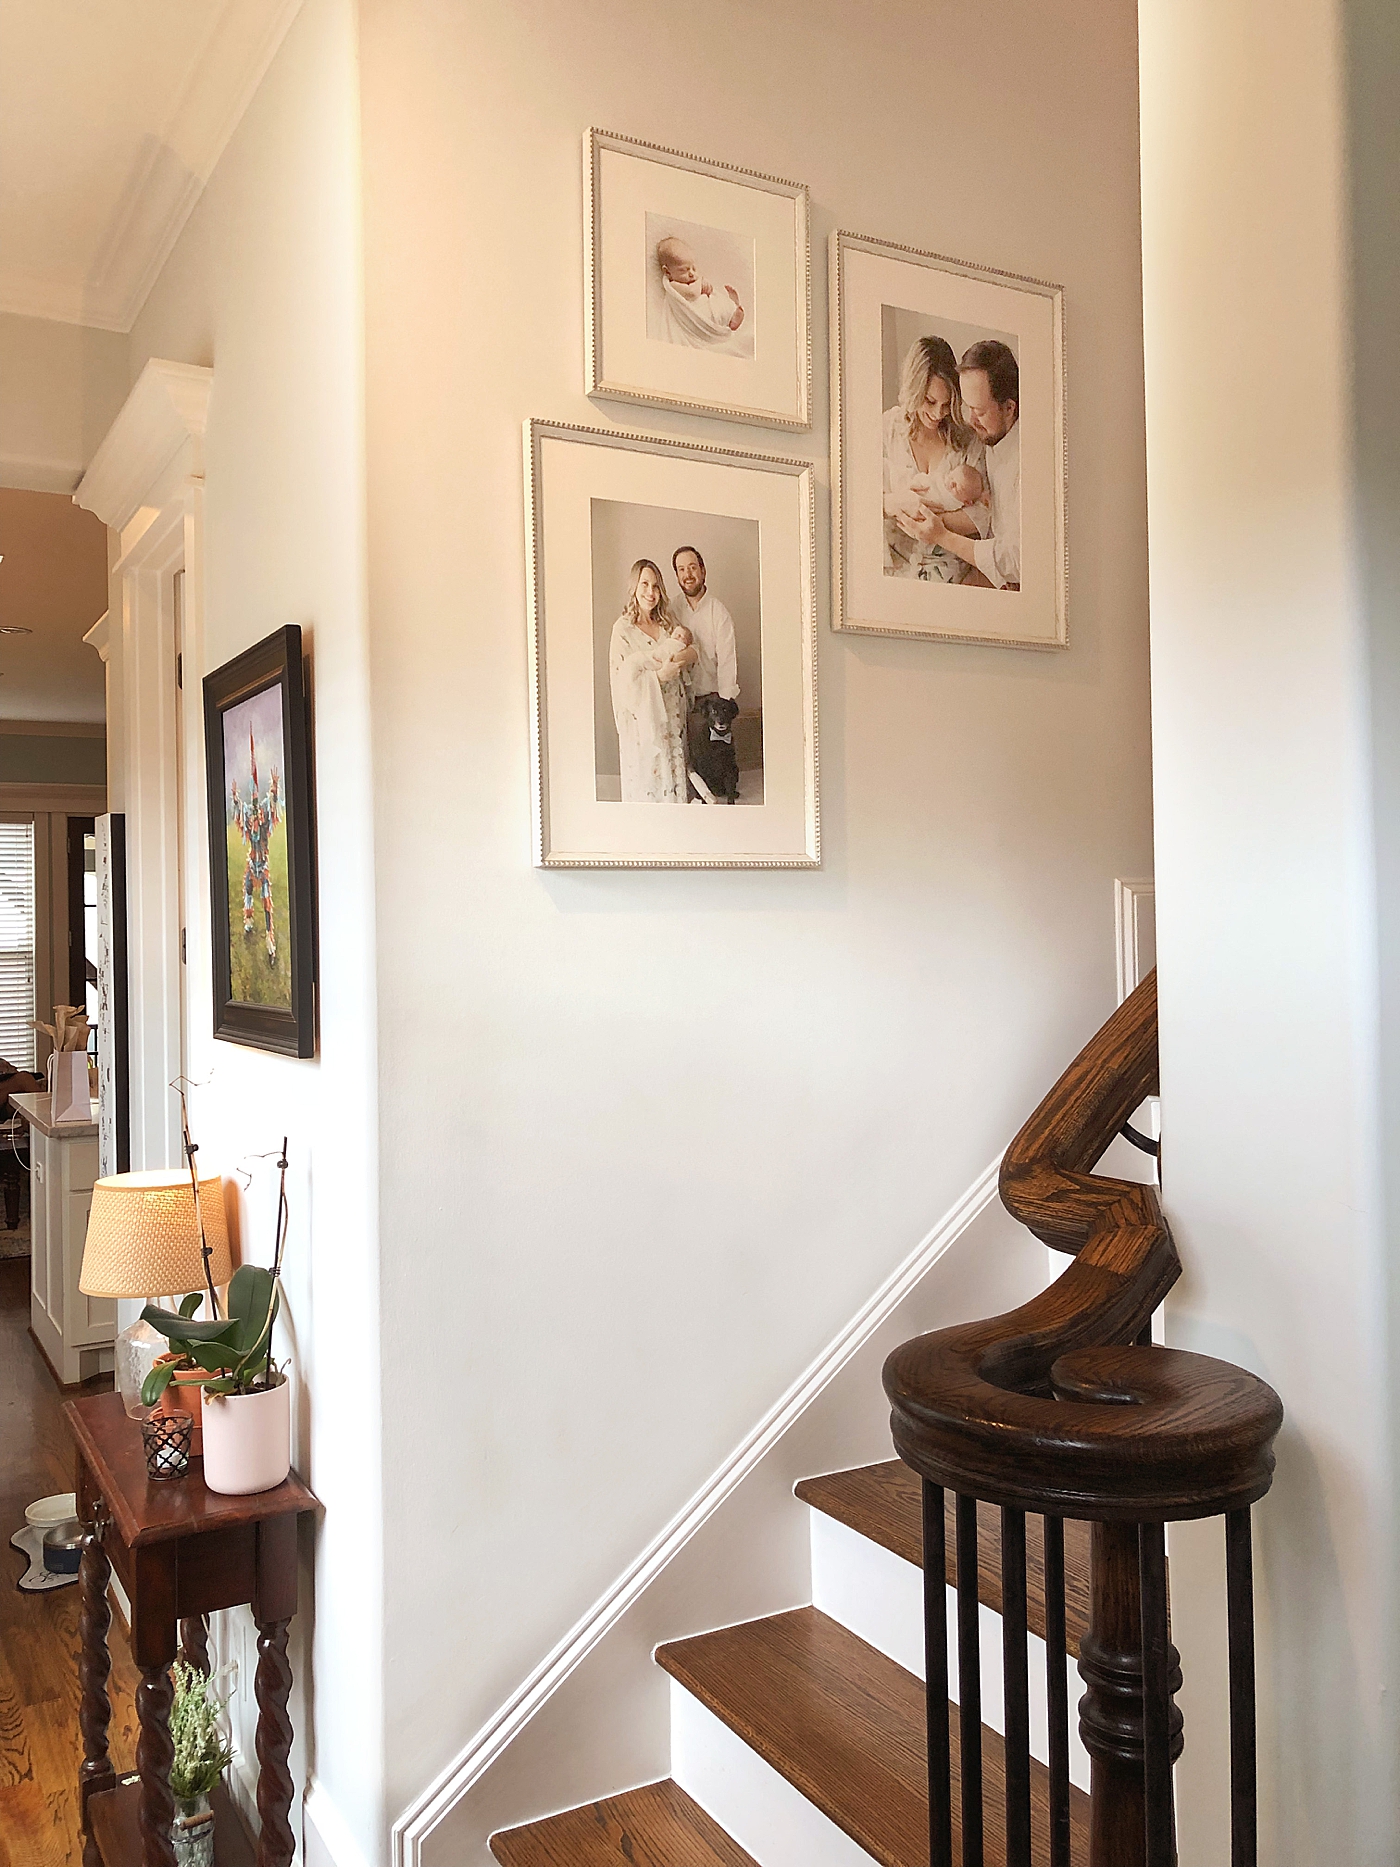 Custom design and gallery wall on stairway by Fresh Light Photography.